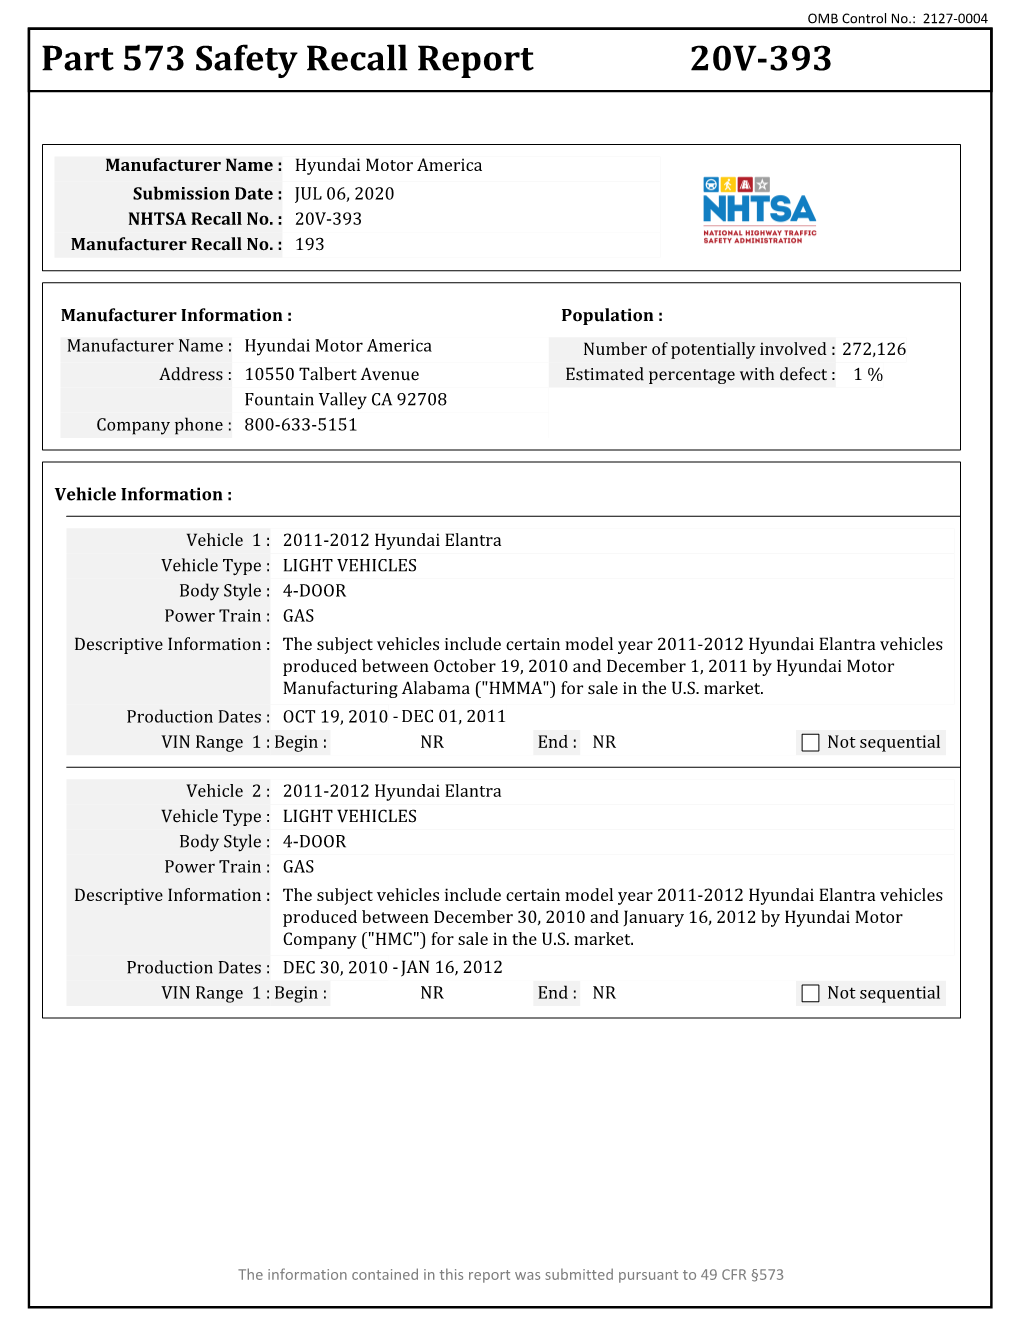 Part 573 Safety Recall Report 20V-393